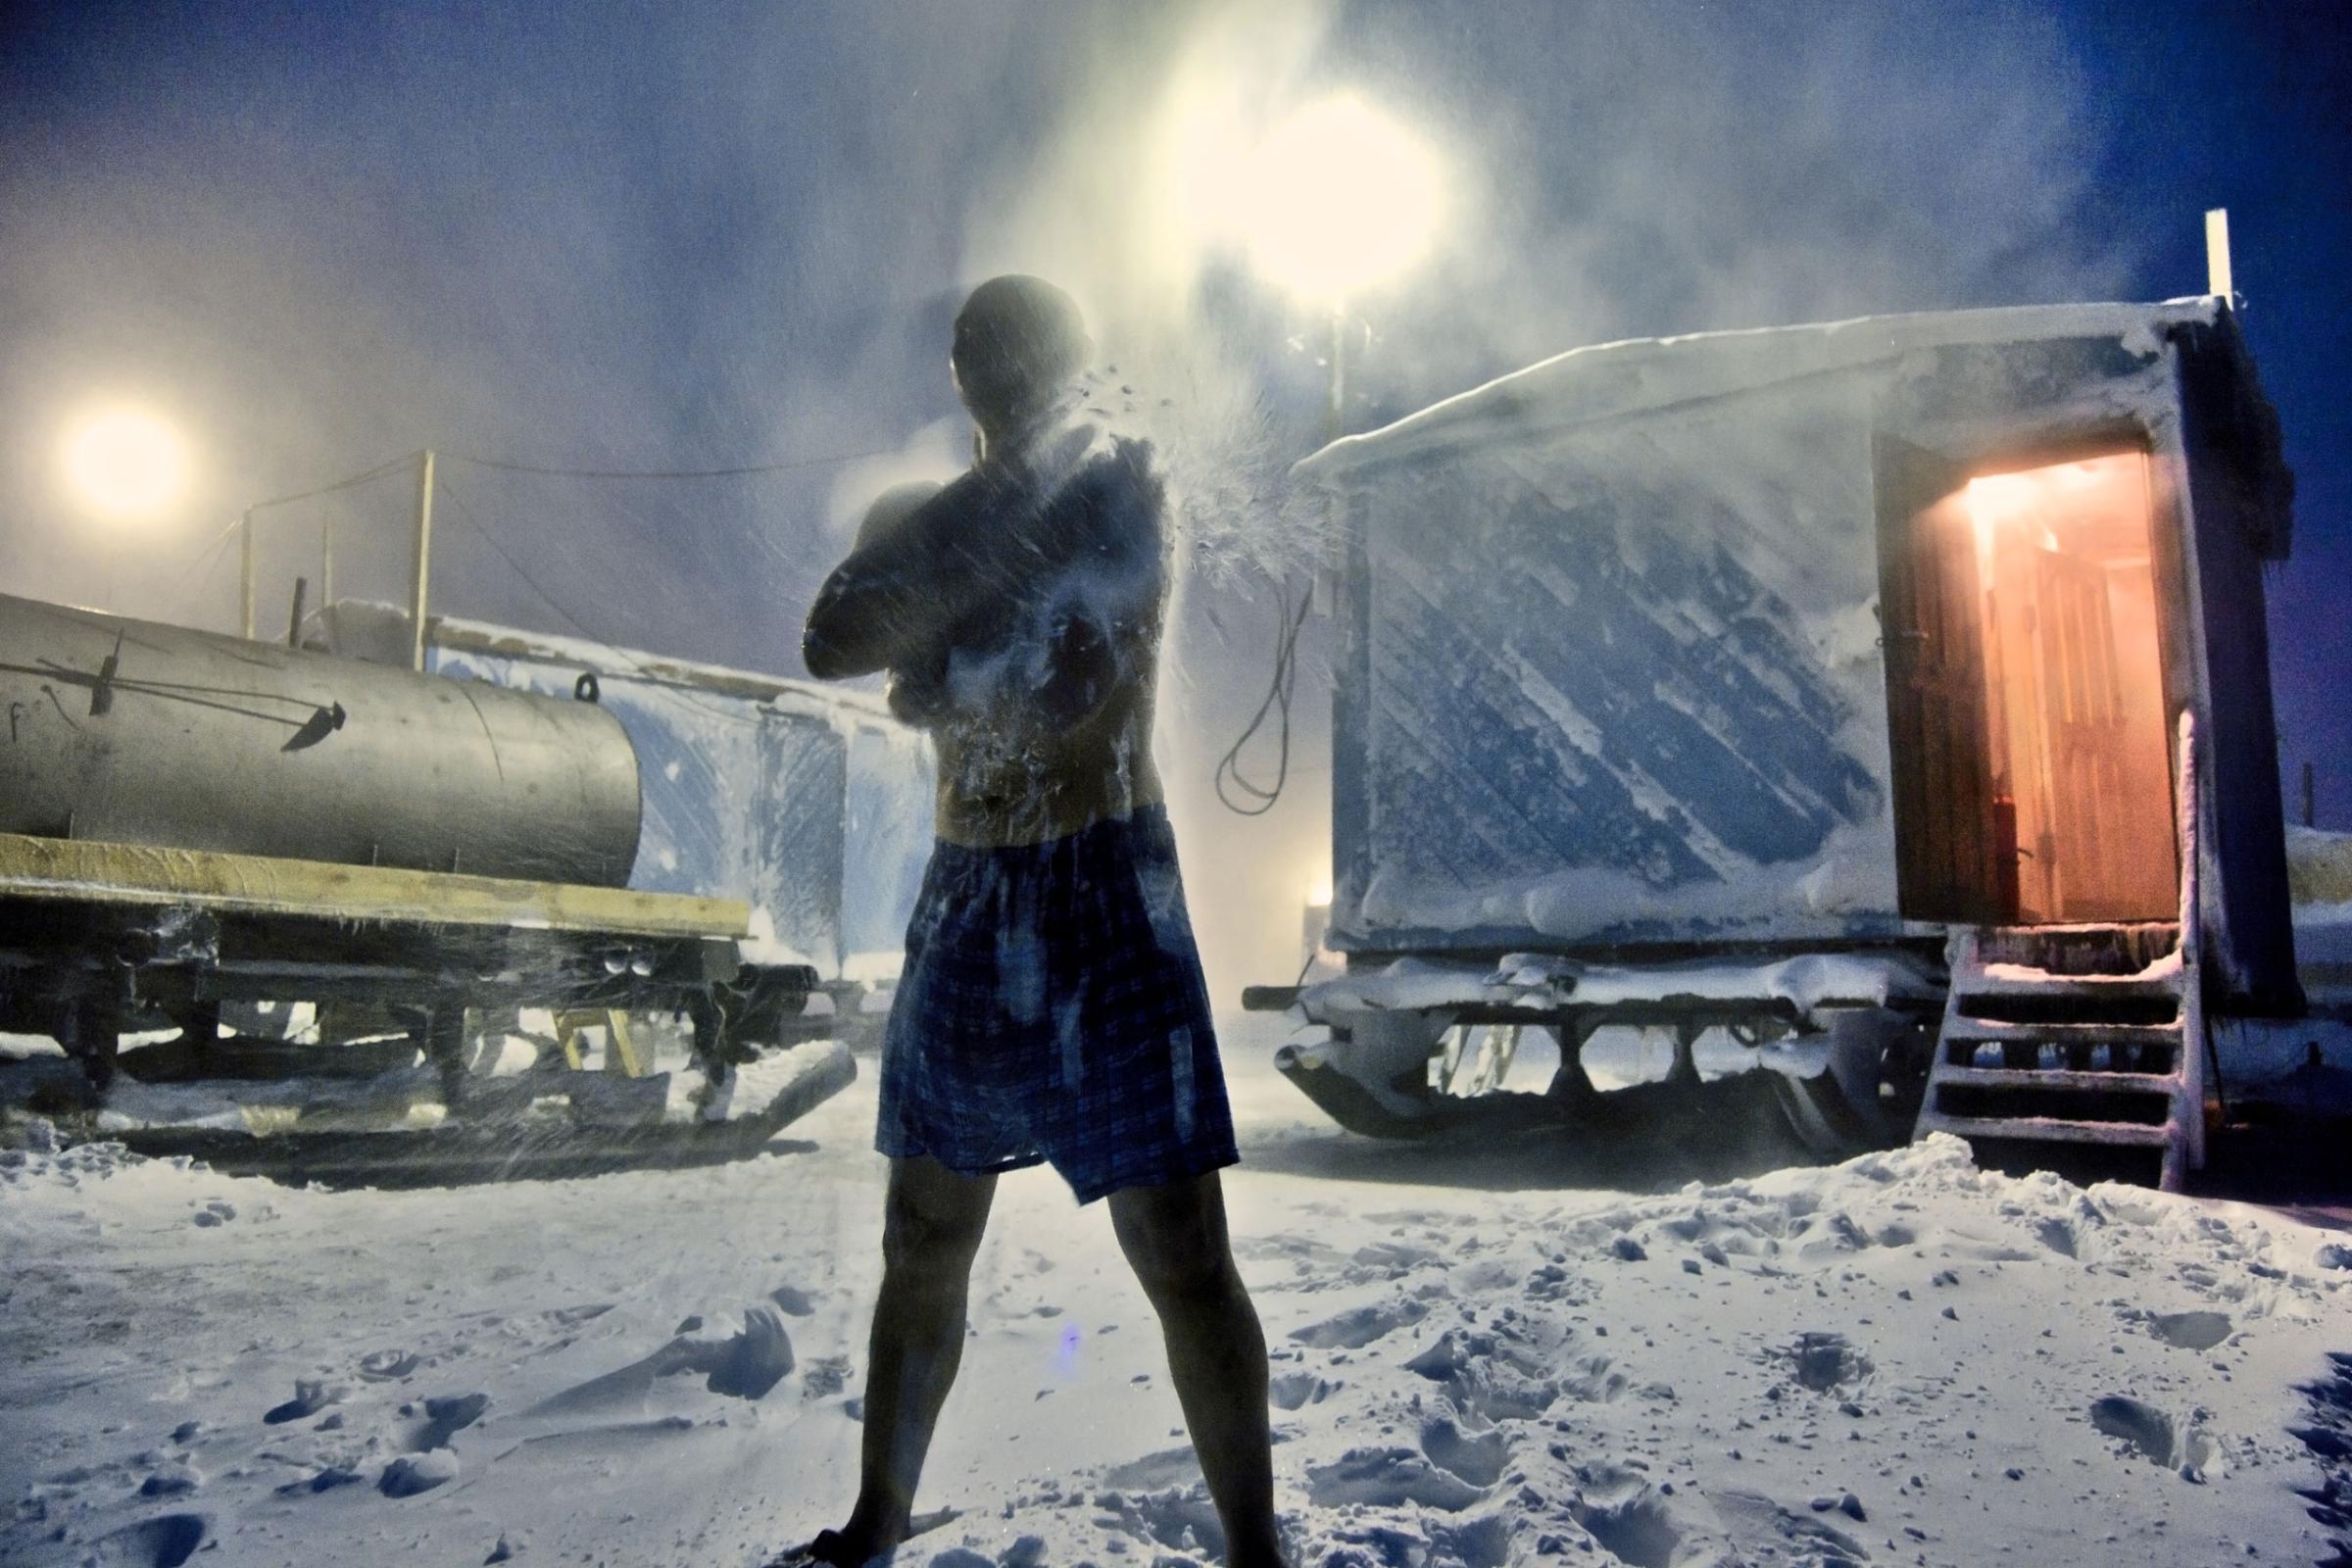 A worker rubs snow during sauna at Arctic gas prospecting site